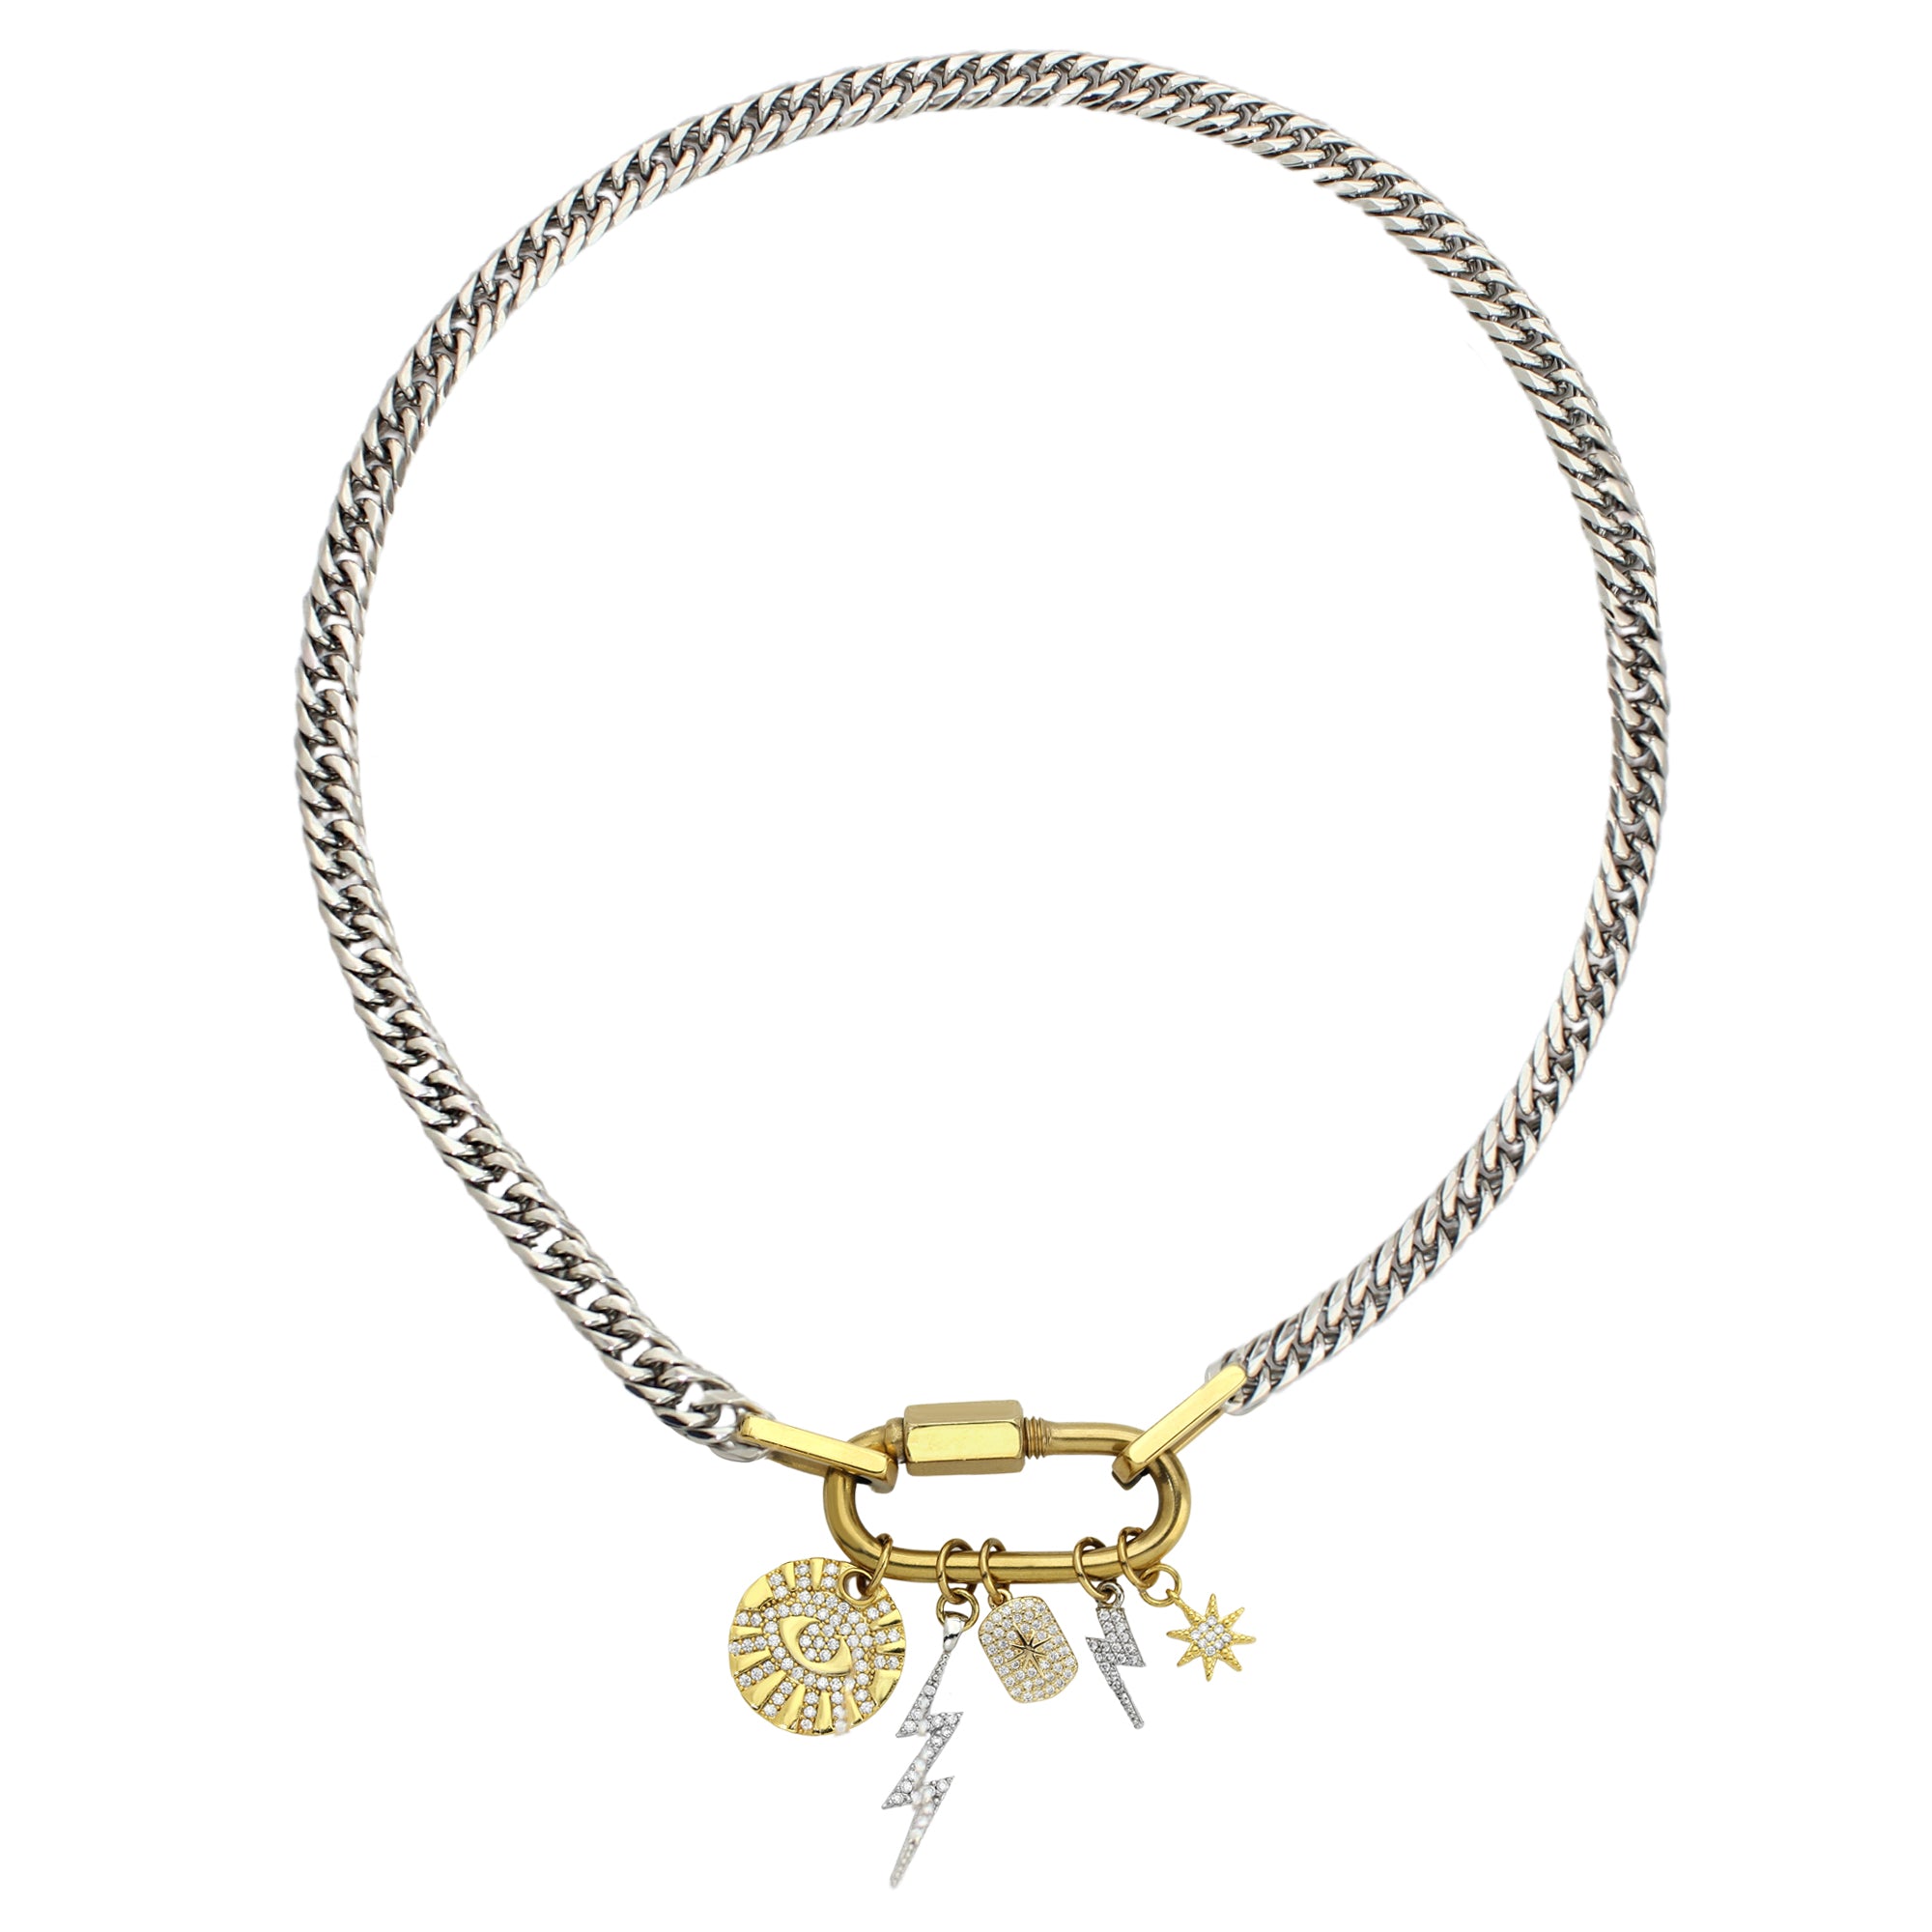 The ANNE CHARM NECKLACE which is an 18